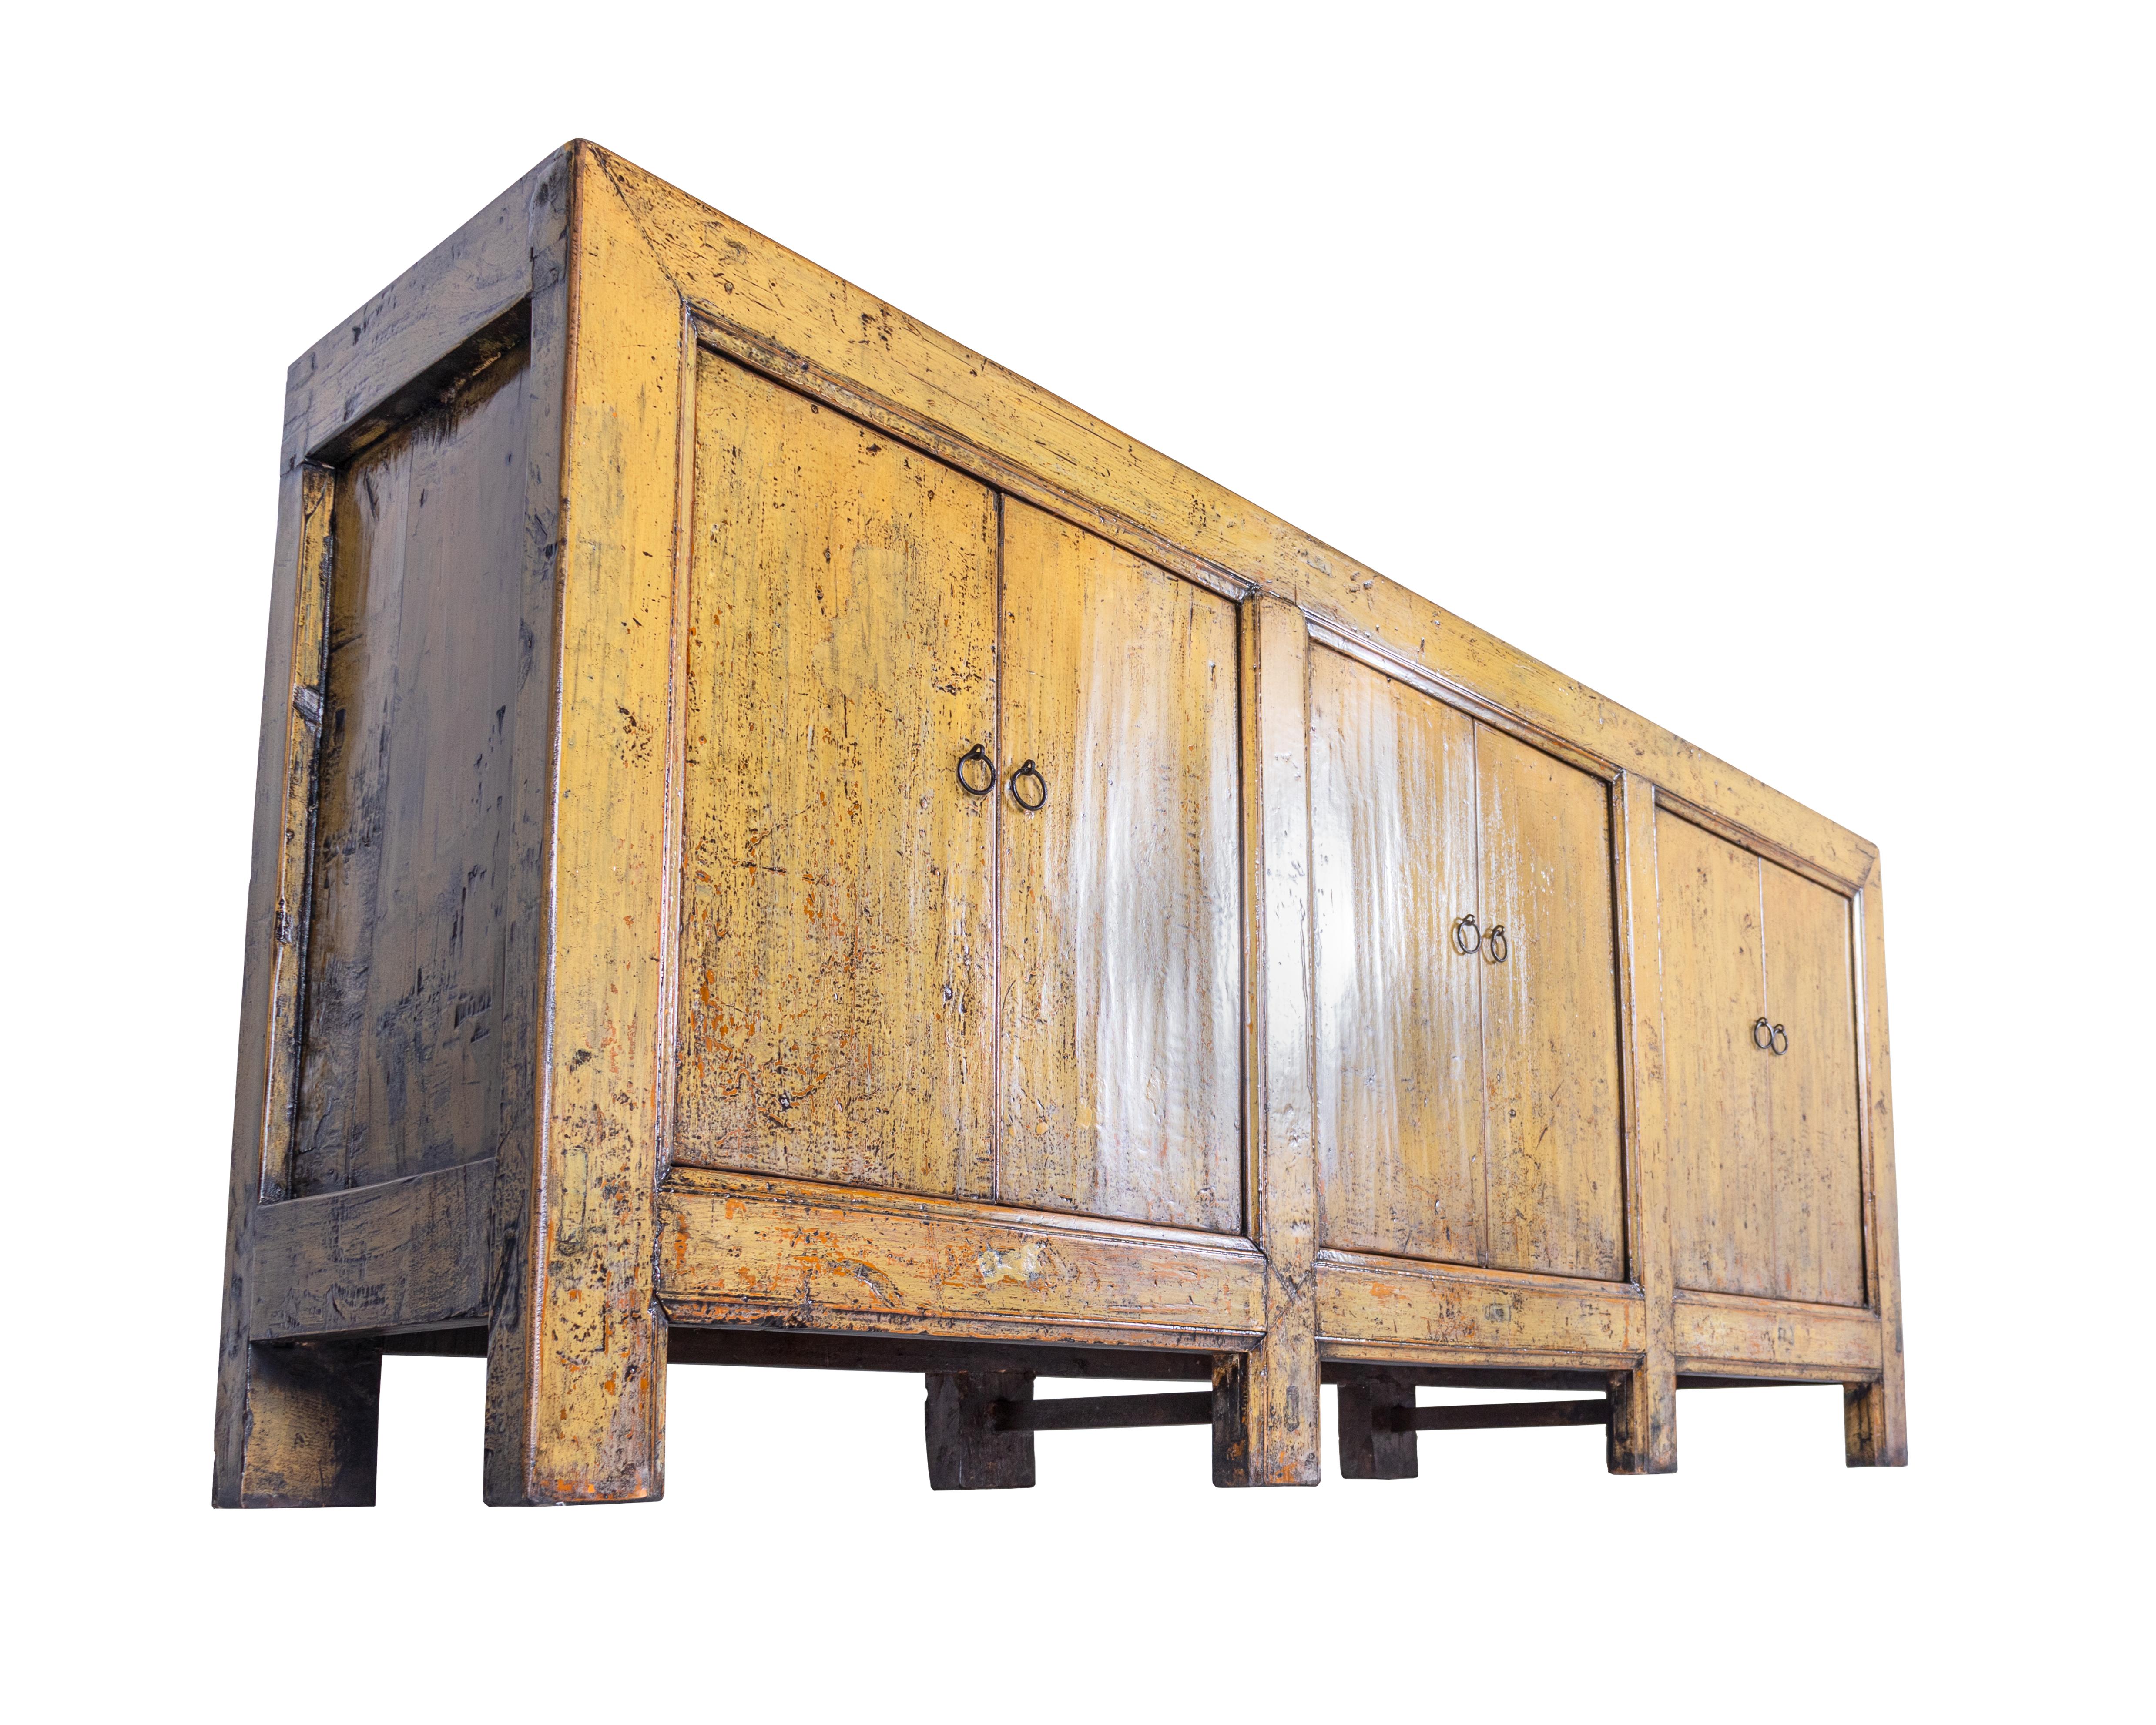 Six door server credenza in a mustard / yellow tone paint patina with lacquer glaze. Made from reclaimed Elm wood. In my organic, contemporary, vintage and mid-century modern aesthetic.

Part of our one of a kind Le Monde collection. Exclusive to